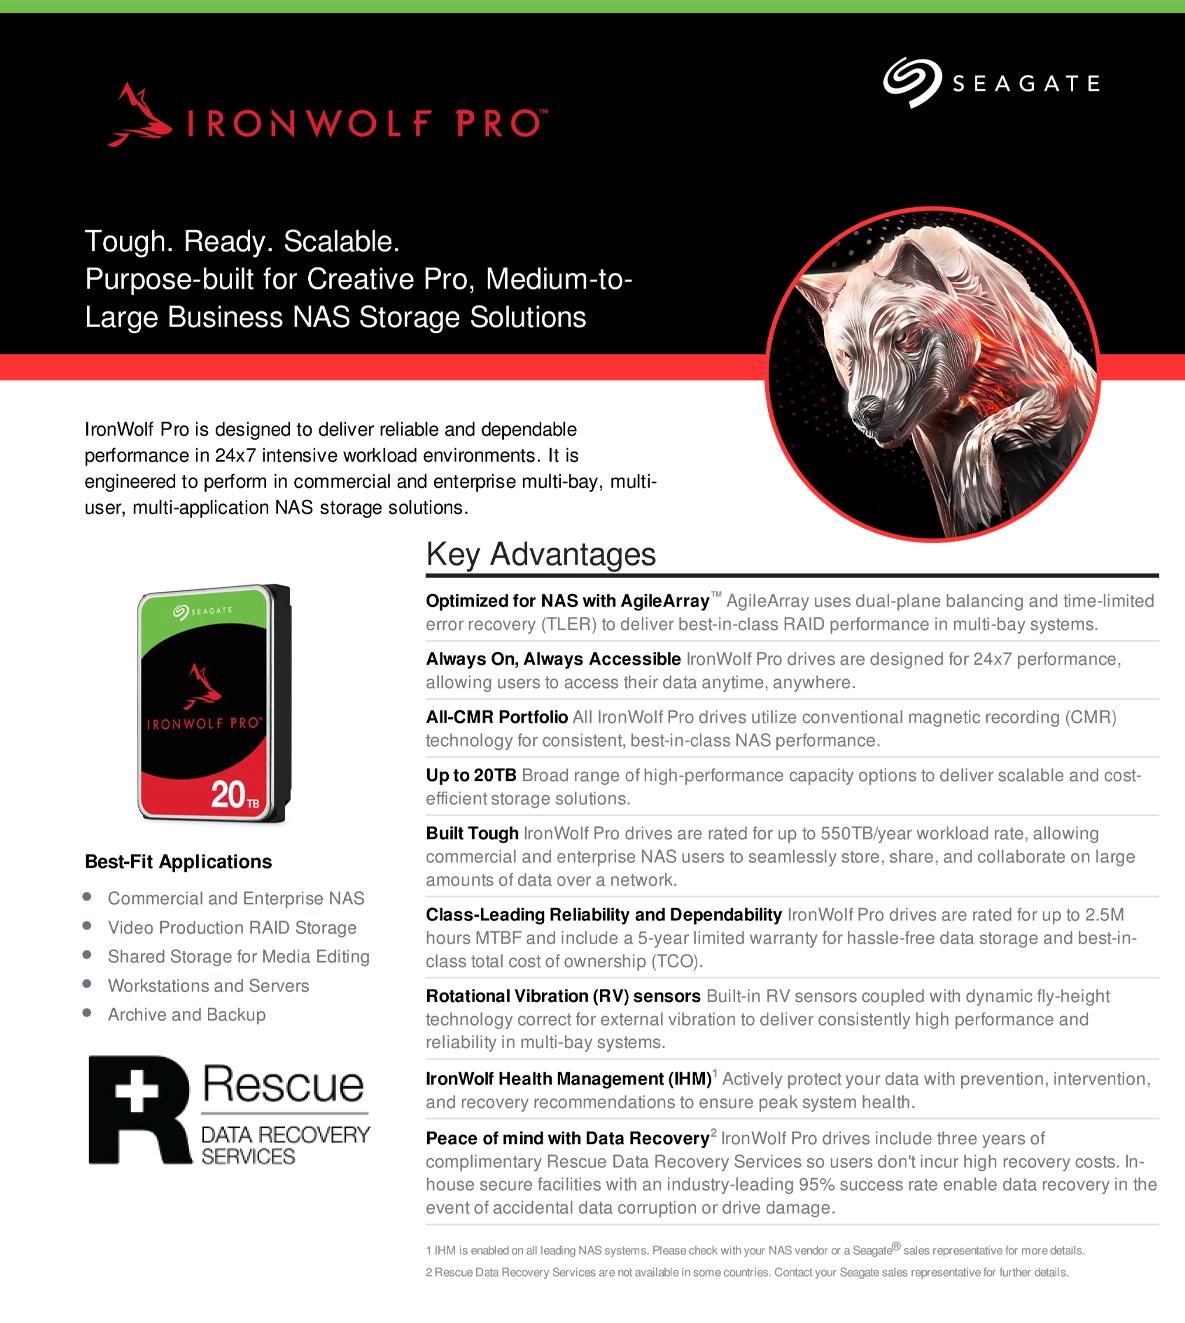 A large marketing image providing additional information about the product Seagate IronWolf Pro 3.5" NAS HDD - 8TB 256MB - Additional alt info not provided